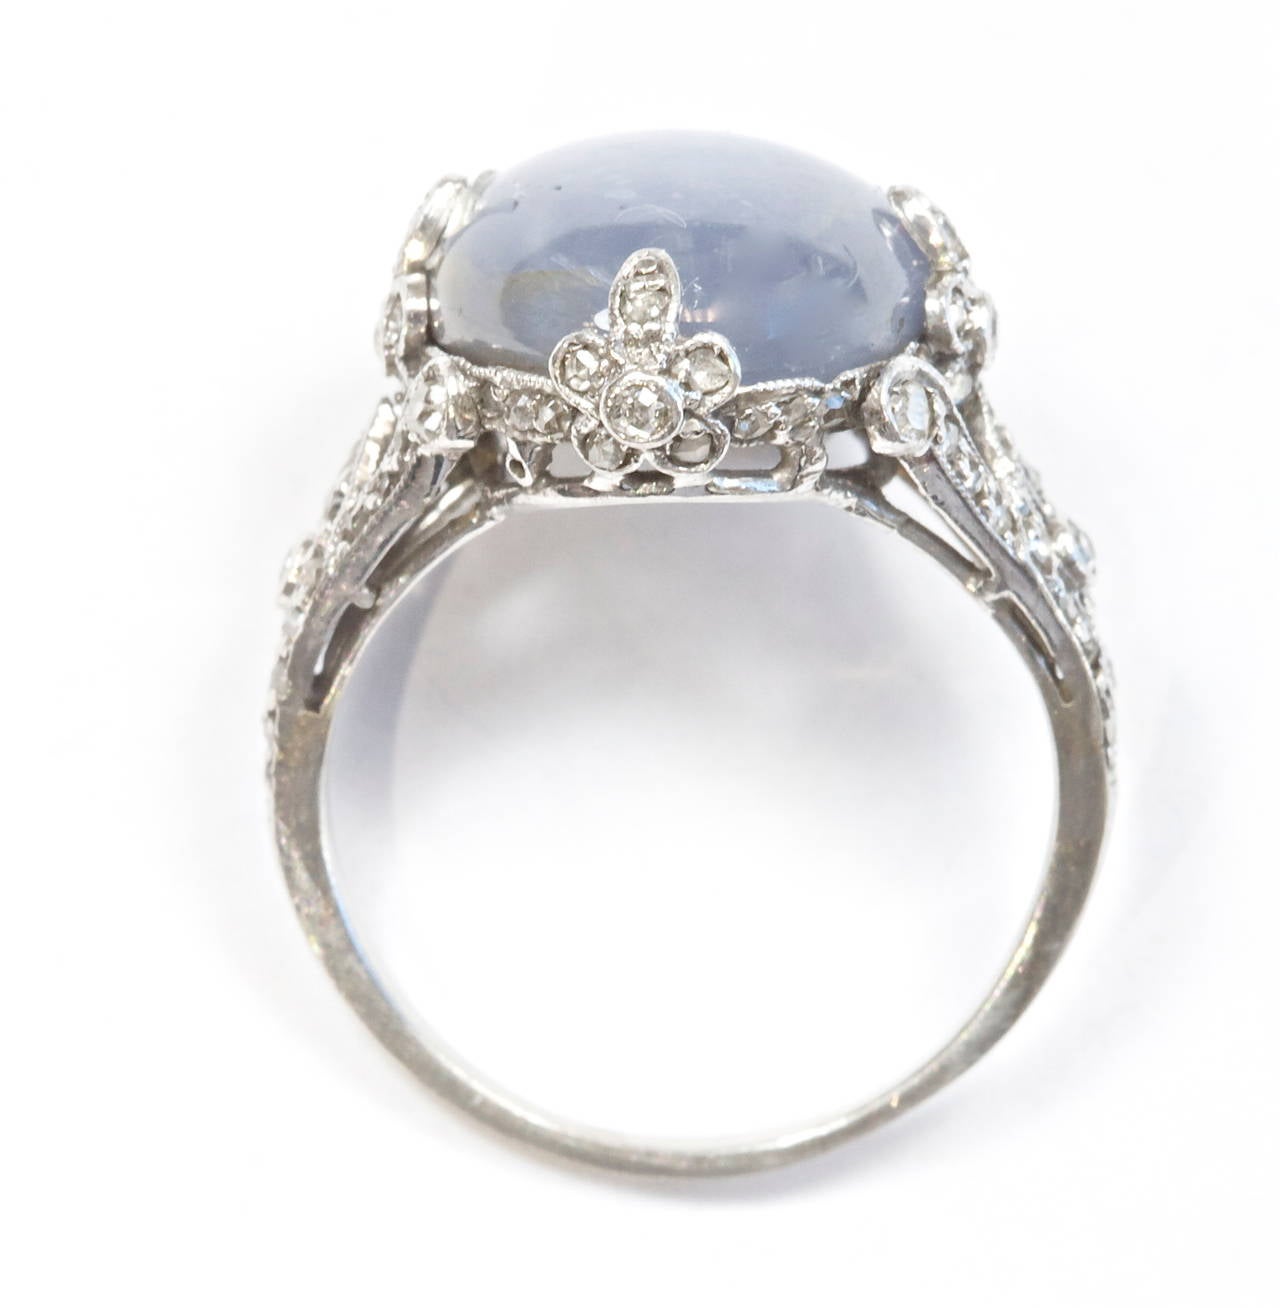 A well defined star blue grey sapphire that weighs approximately 13 carats. Set in a detailed hand made art deco diamond platinum ring.

Ring size 6 and can be resized.